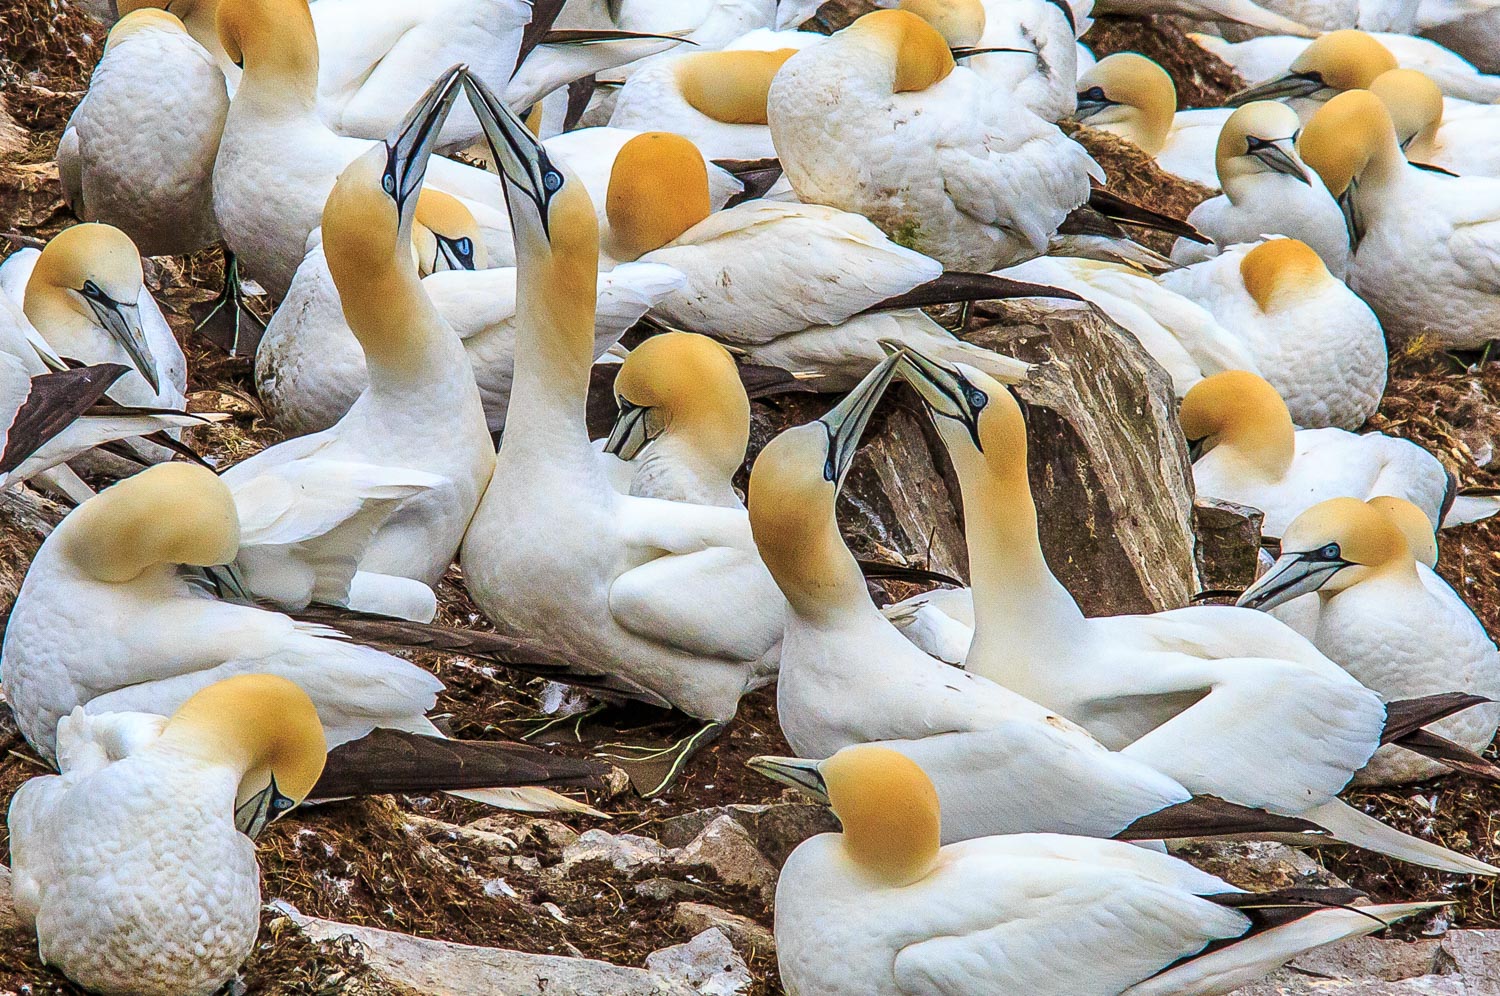 Northern Gannets, Cape St. Mary's Ecological Reserve 2015.06.27